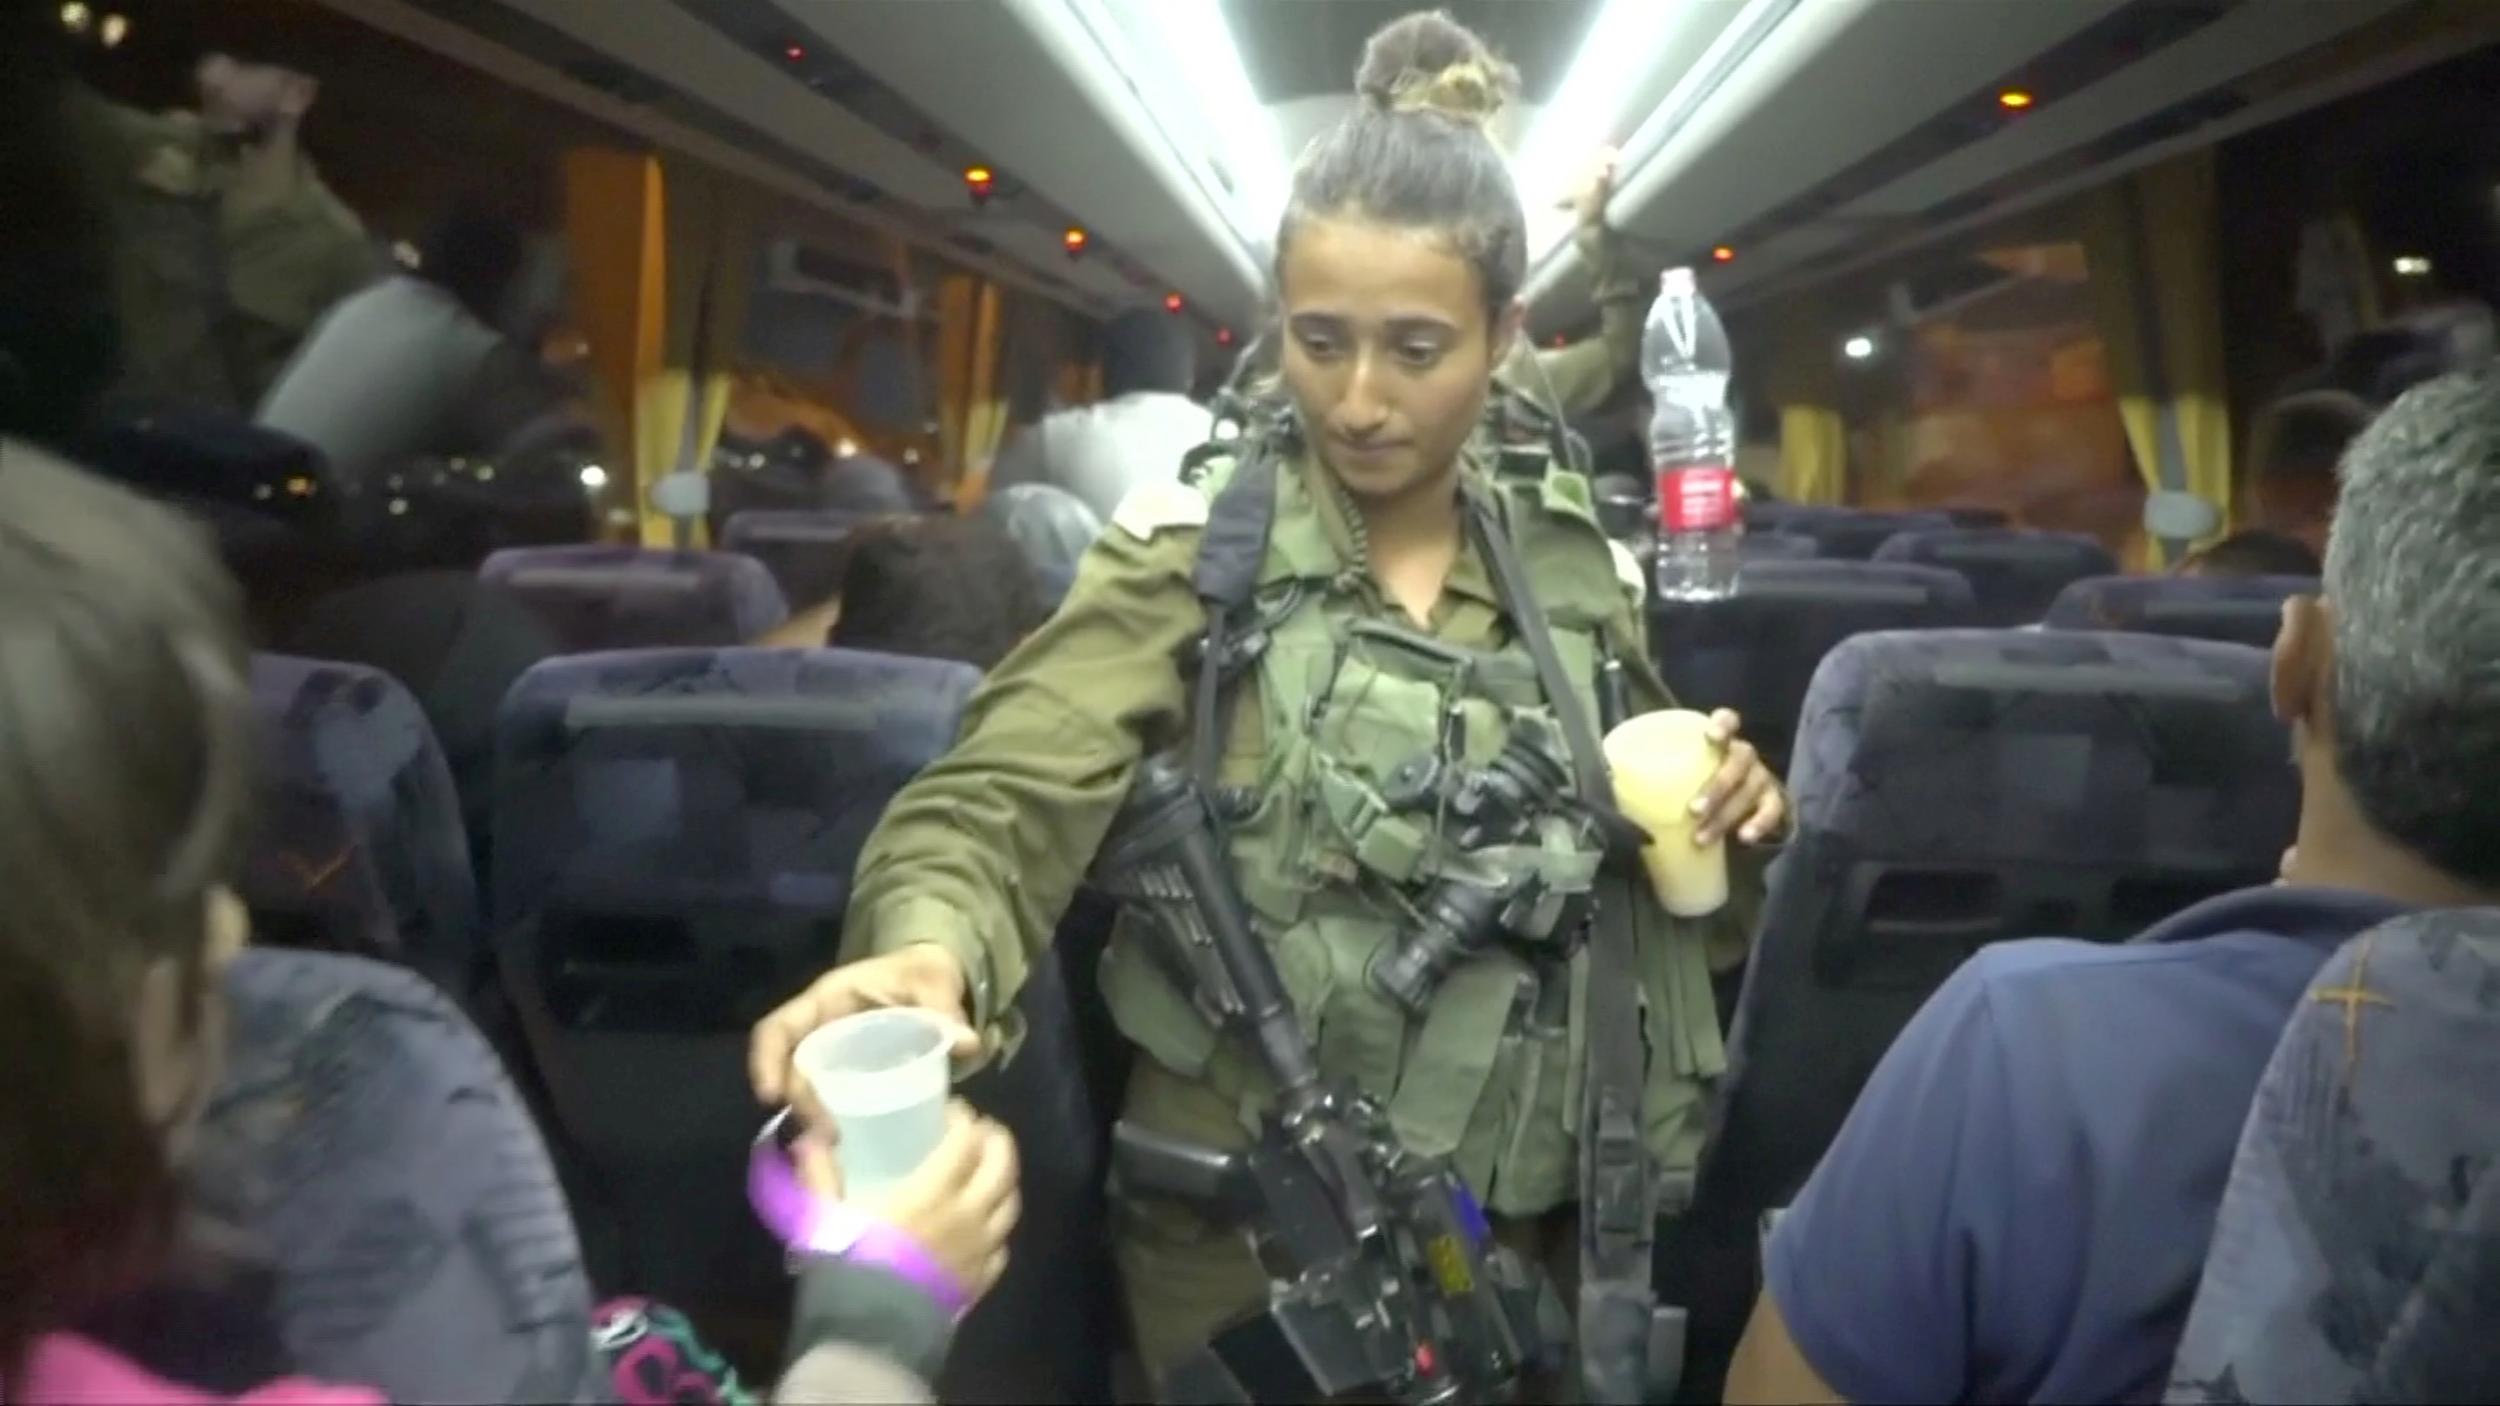 An Israeli soldier hands out water on a bus to Syrians during a rescue operation to extract White Helmets